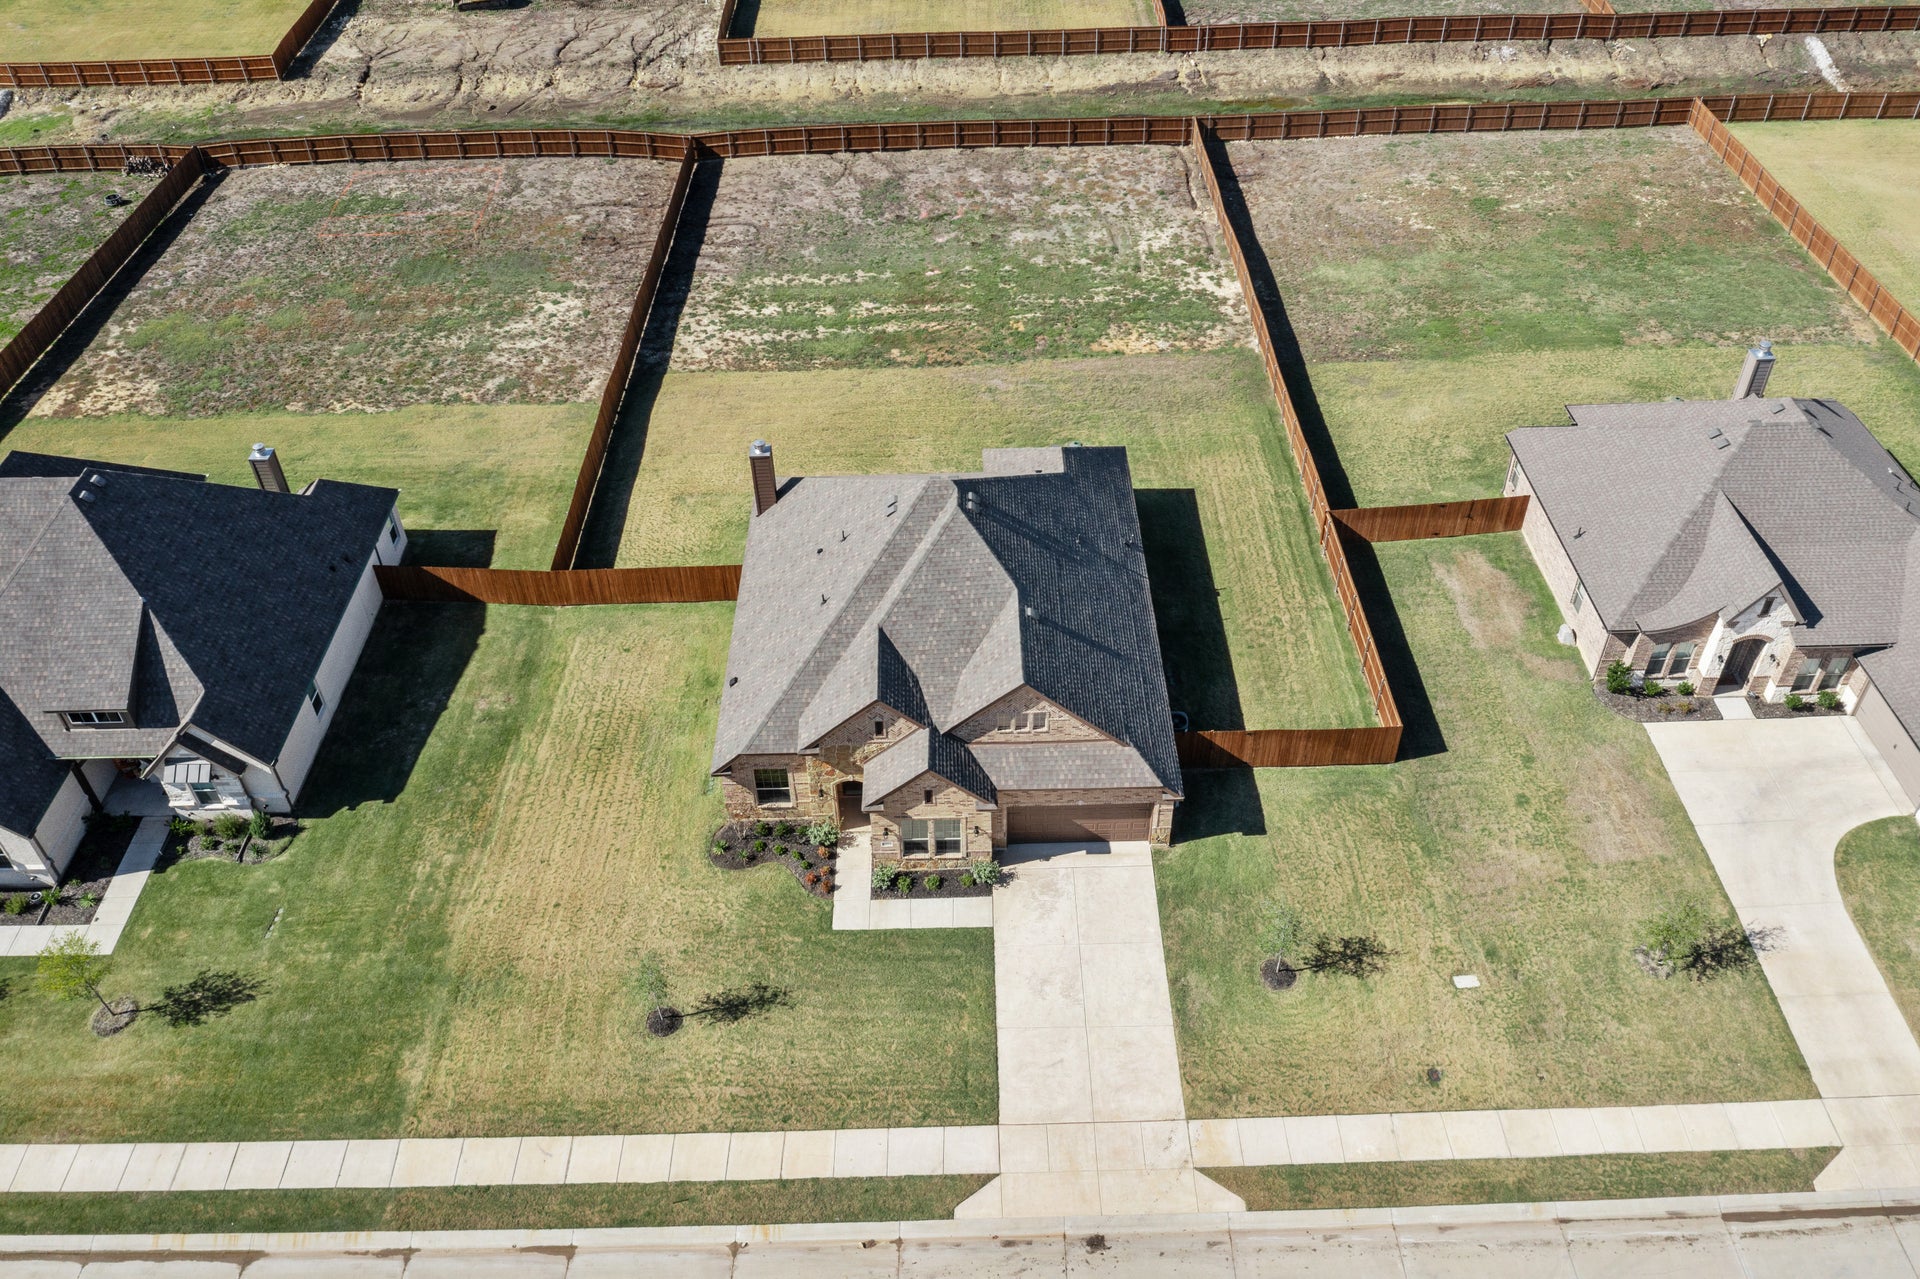 2,435sf New Home in Godley, TX